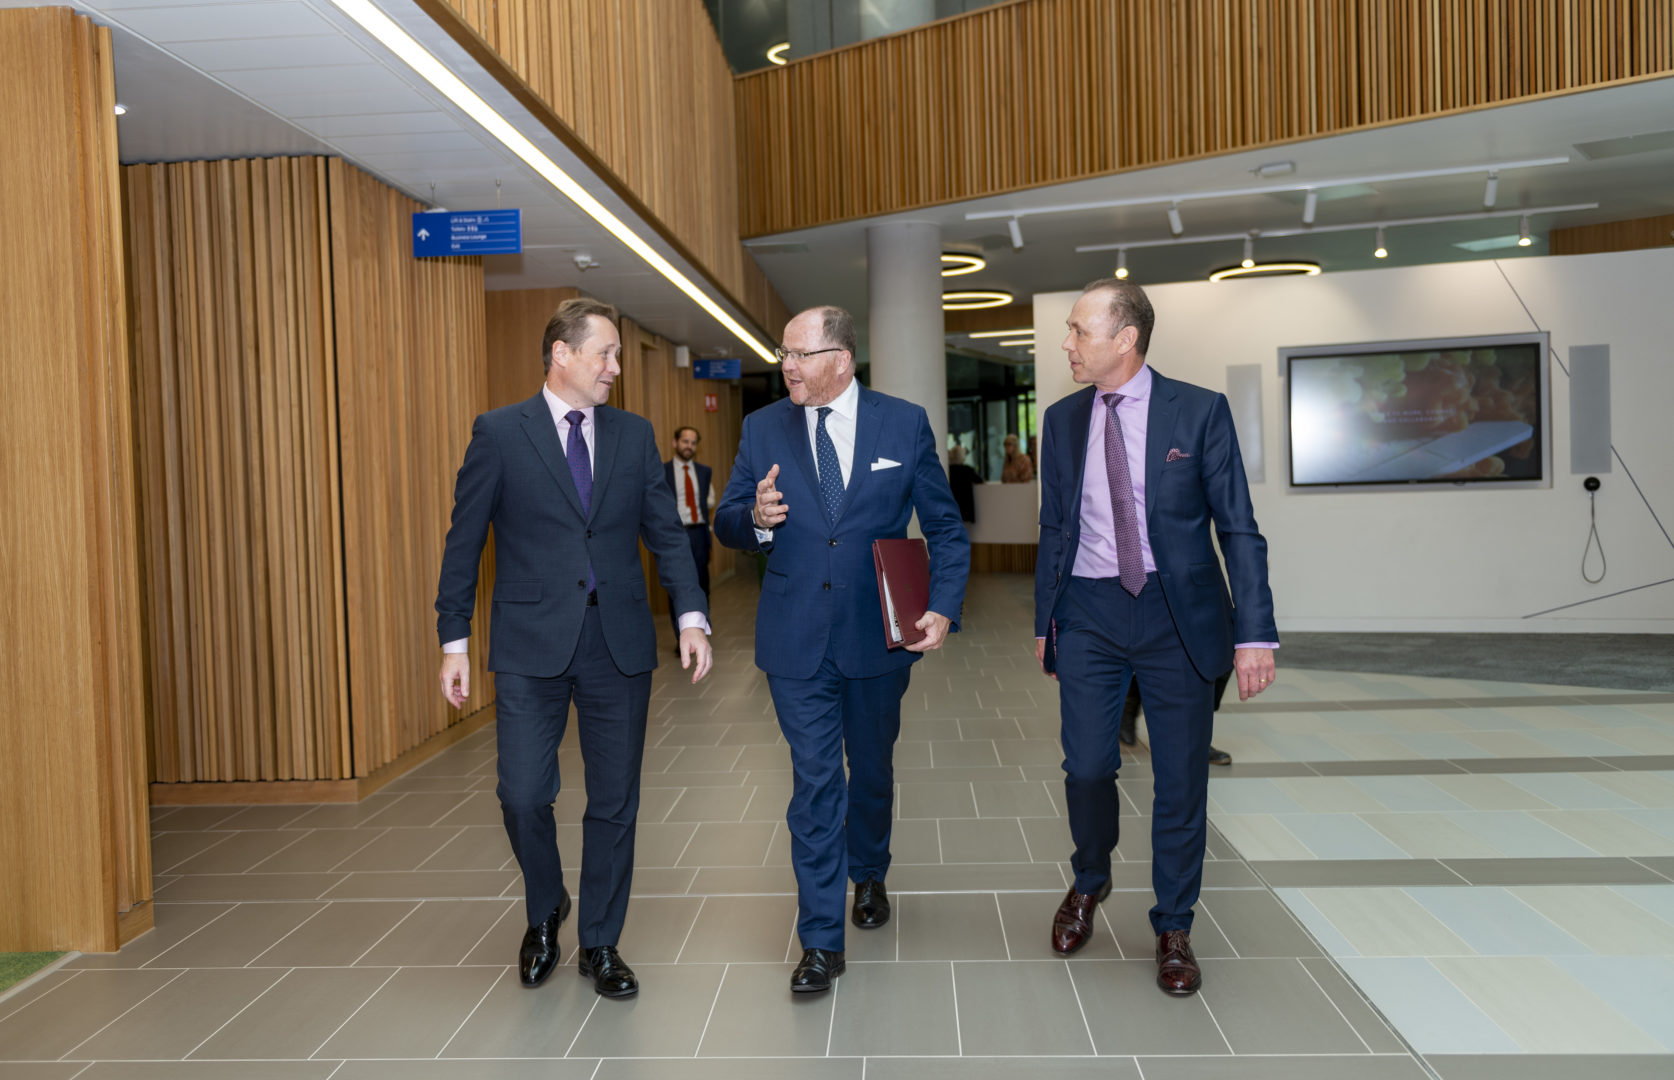 Image of people walking in Nexus building. From left, Professor Nick Plant, Science Minister George Freeman and Dr Martin Stow at Nexus (credit University of Leeds)